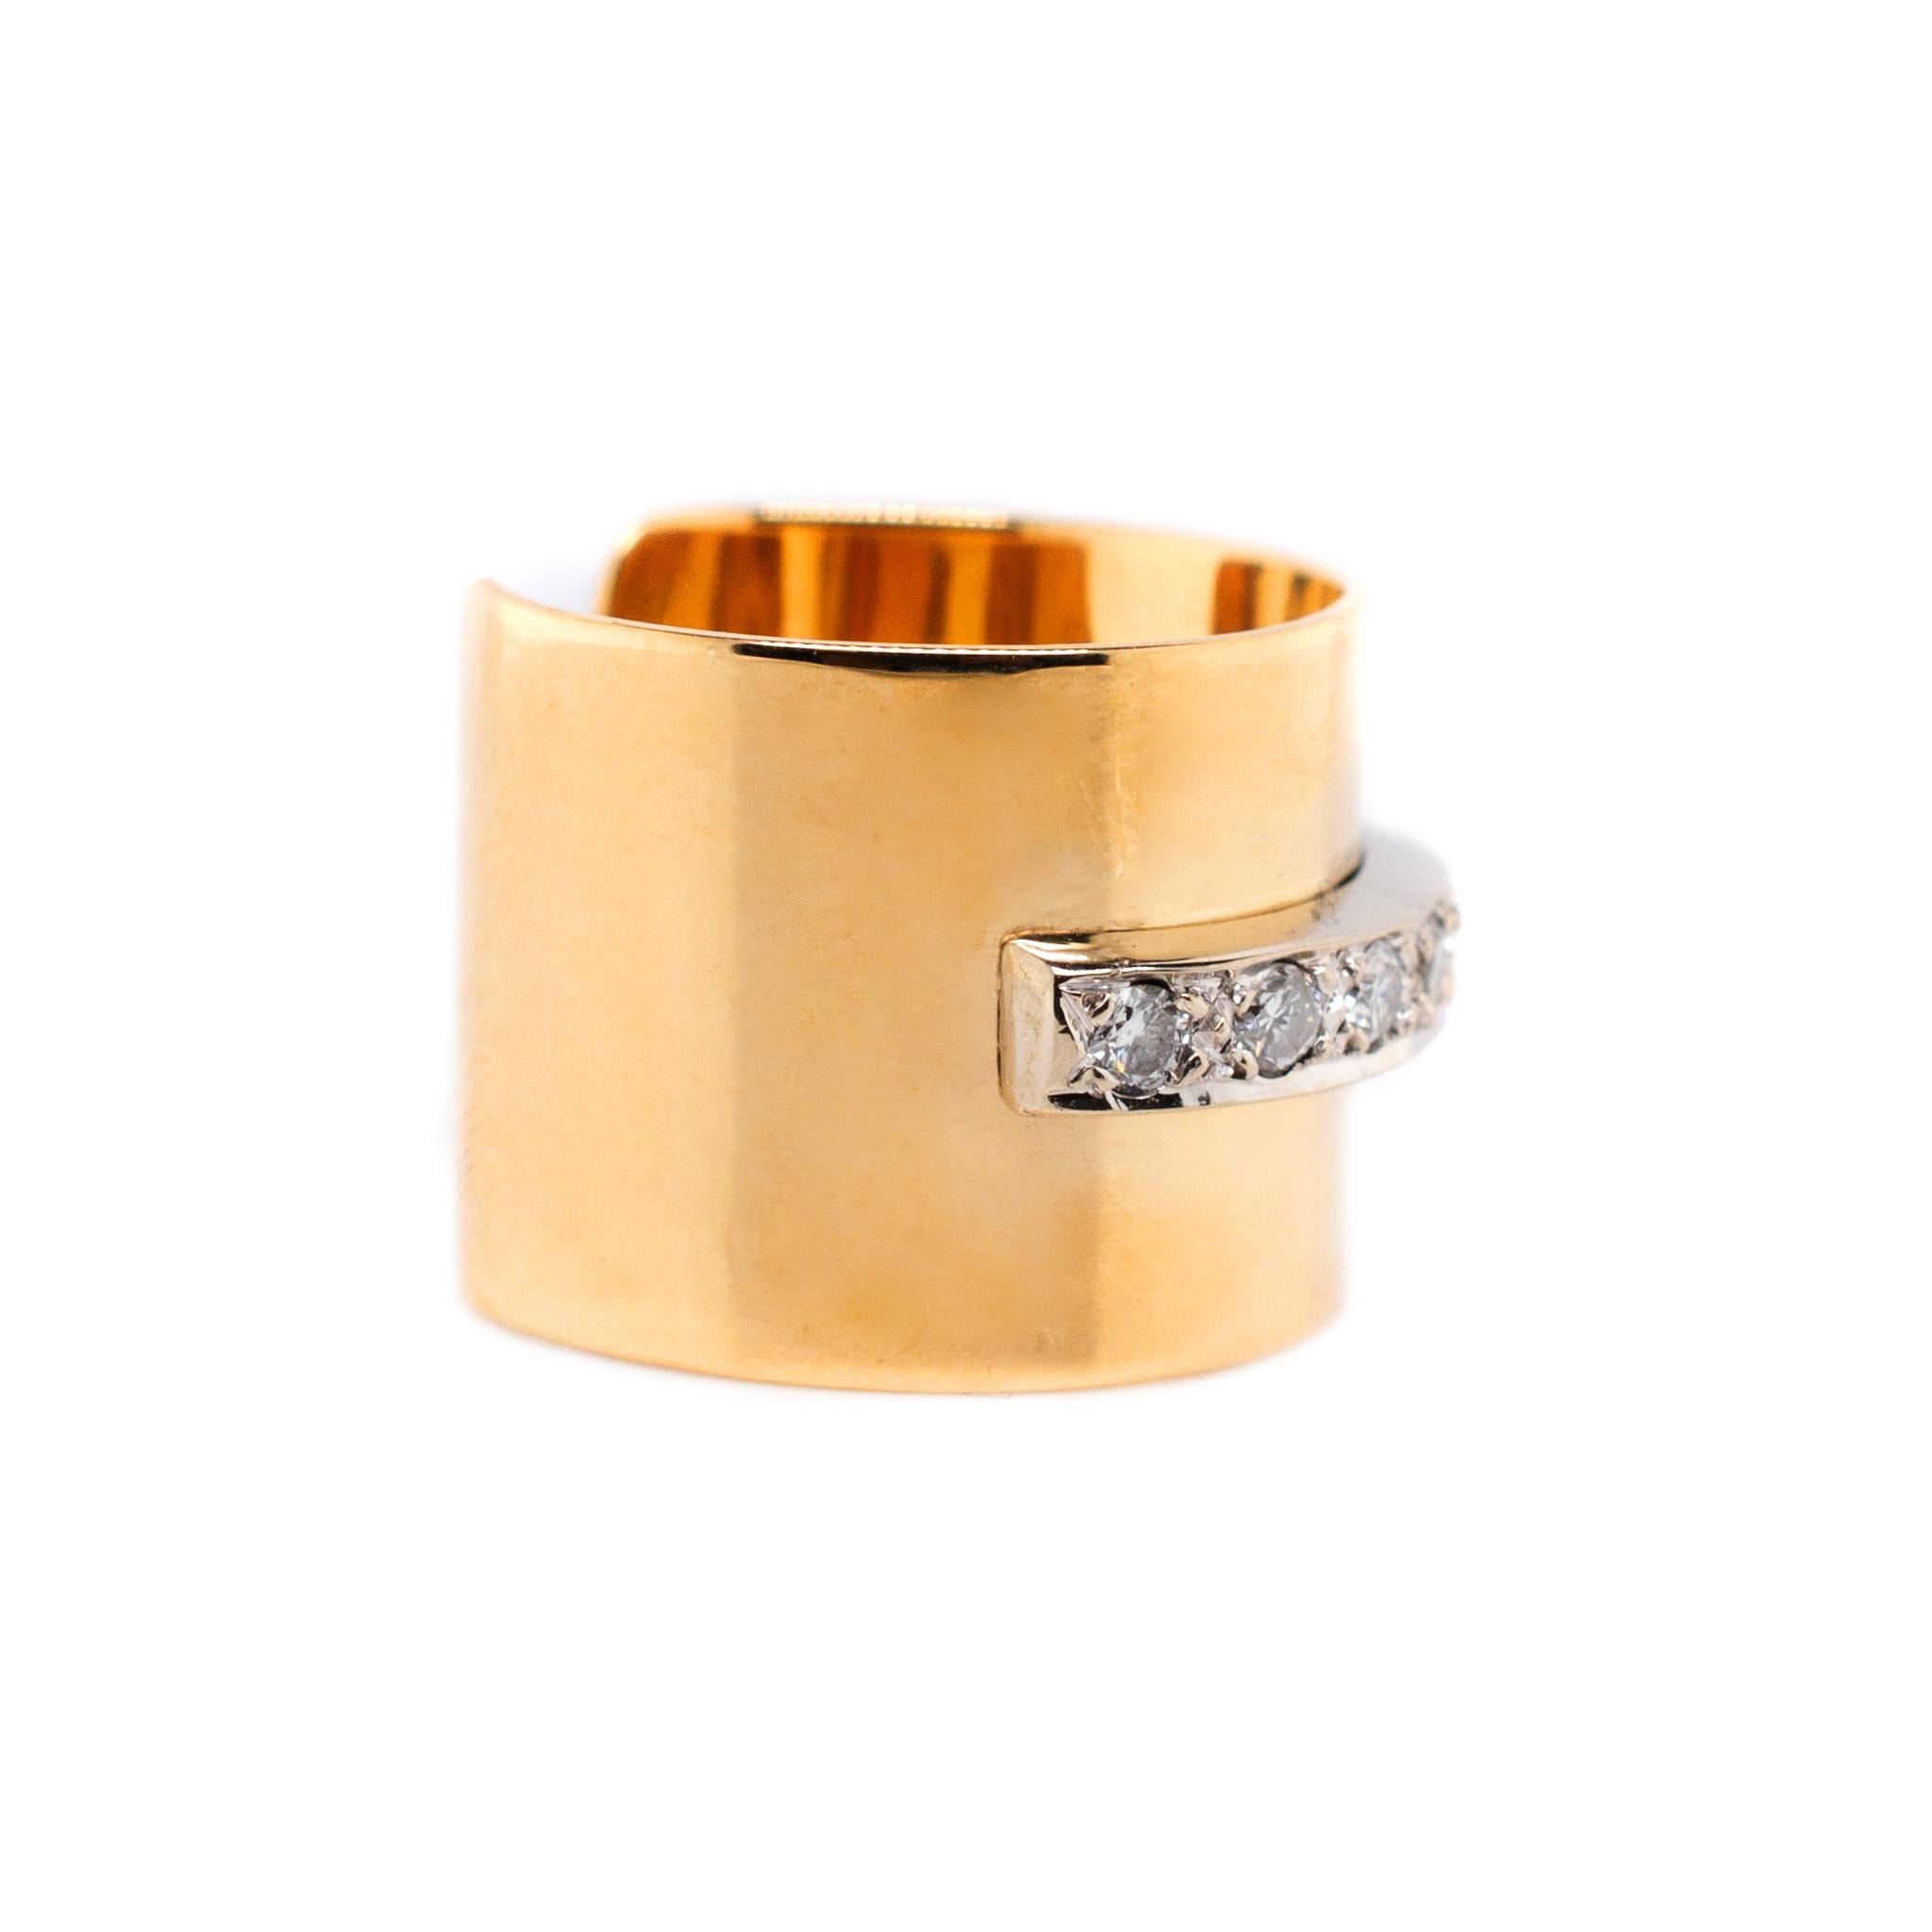 
Gender: Ladies
Metal Type: 14K Yellow Gold
Size: 6
Weight: 6.30 grams
14K yellow gold diamond vintage ring with a tapered, comfort-fit shank. Engraved with 